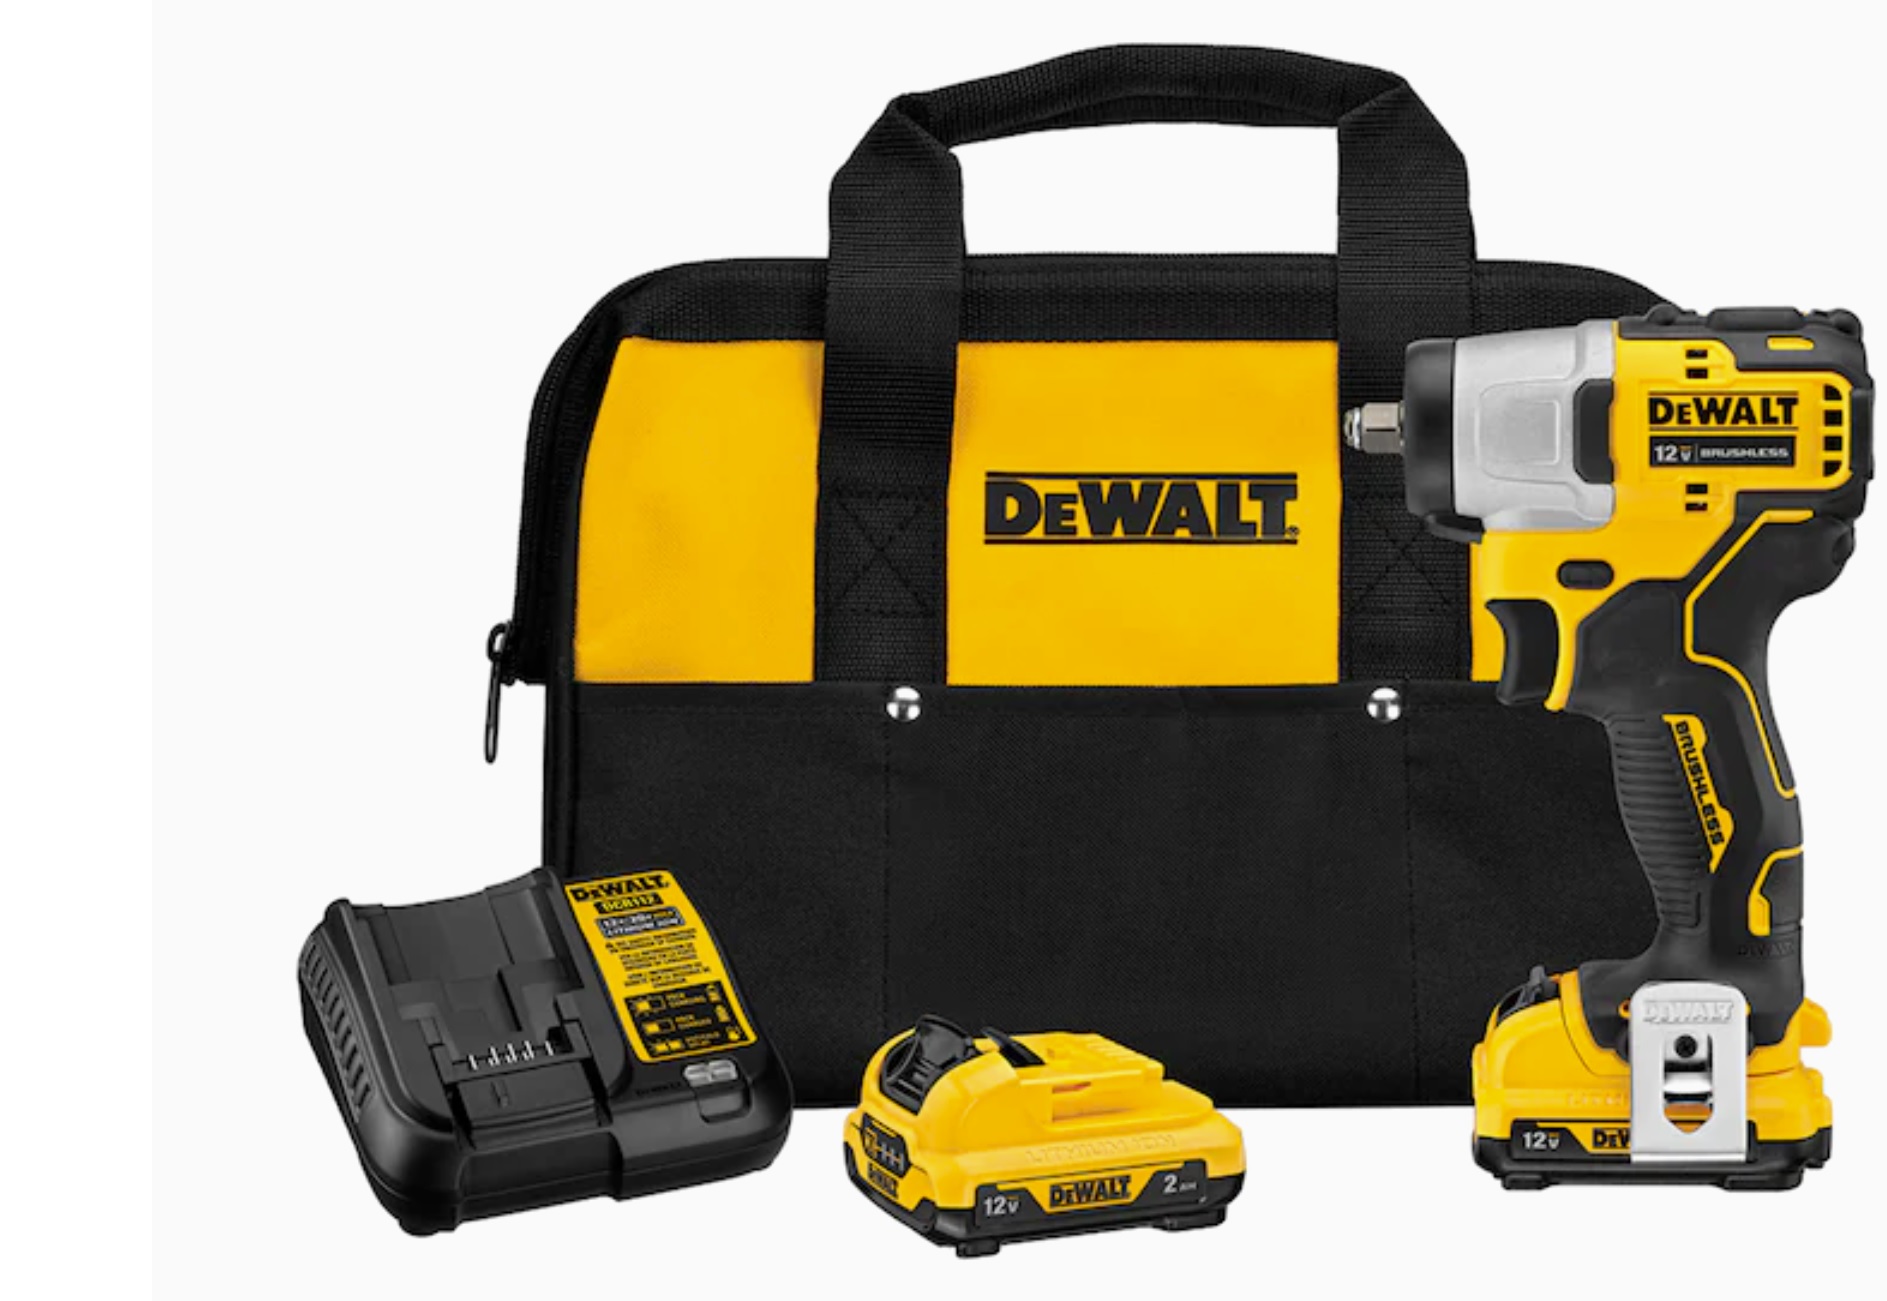 DEWALT XTREME 12-volt Brushless 3/8-in Drive Cordless Impact Wrench (2-Batteries Included) ($99 + Free Shipping)